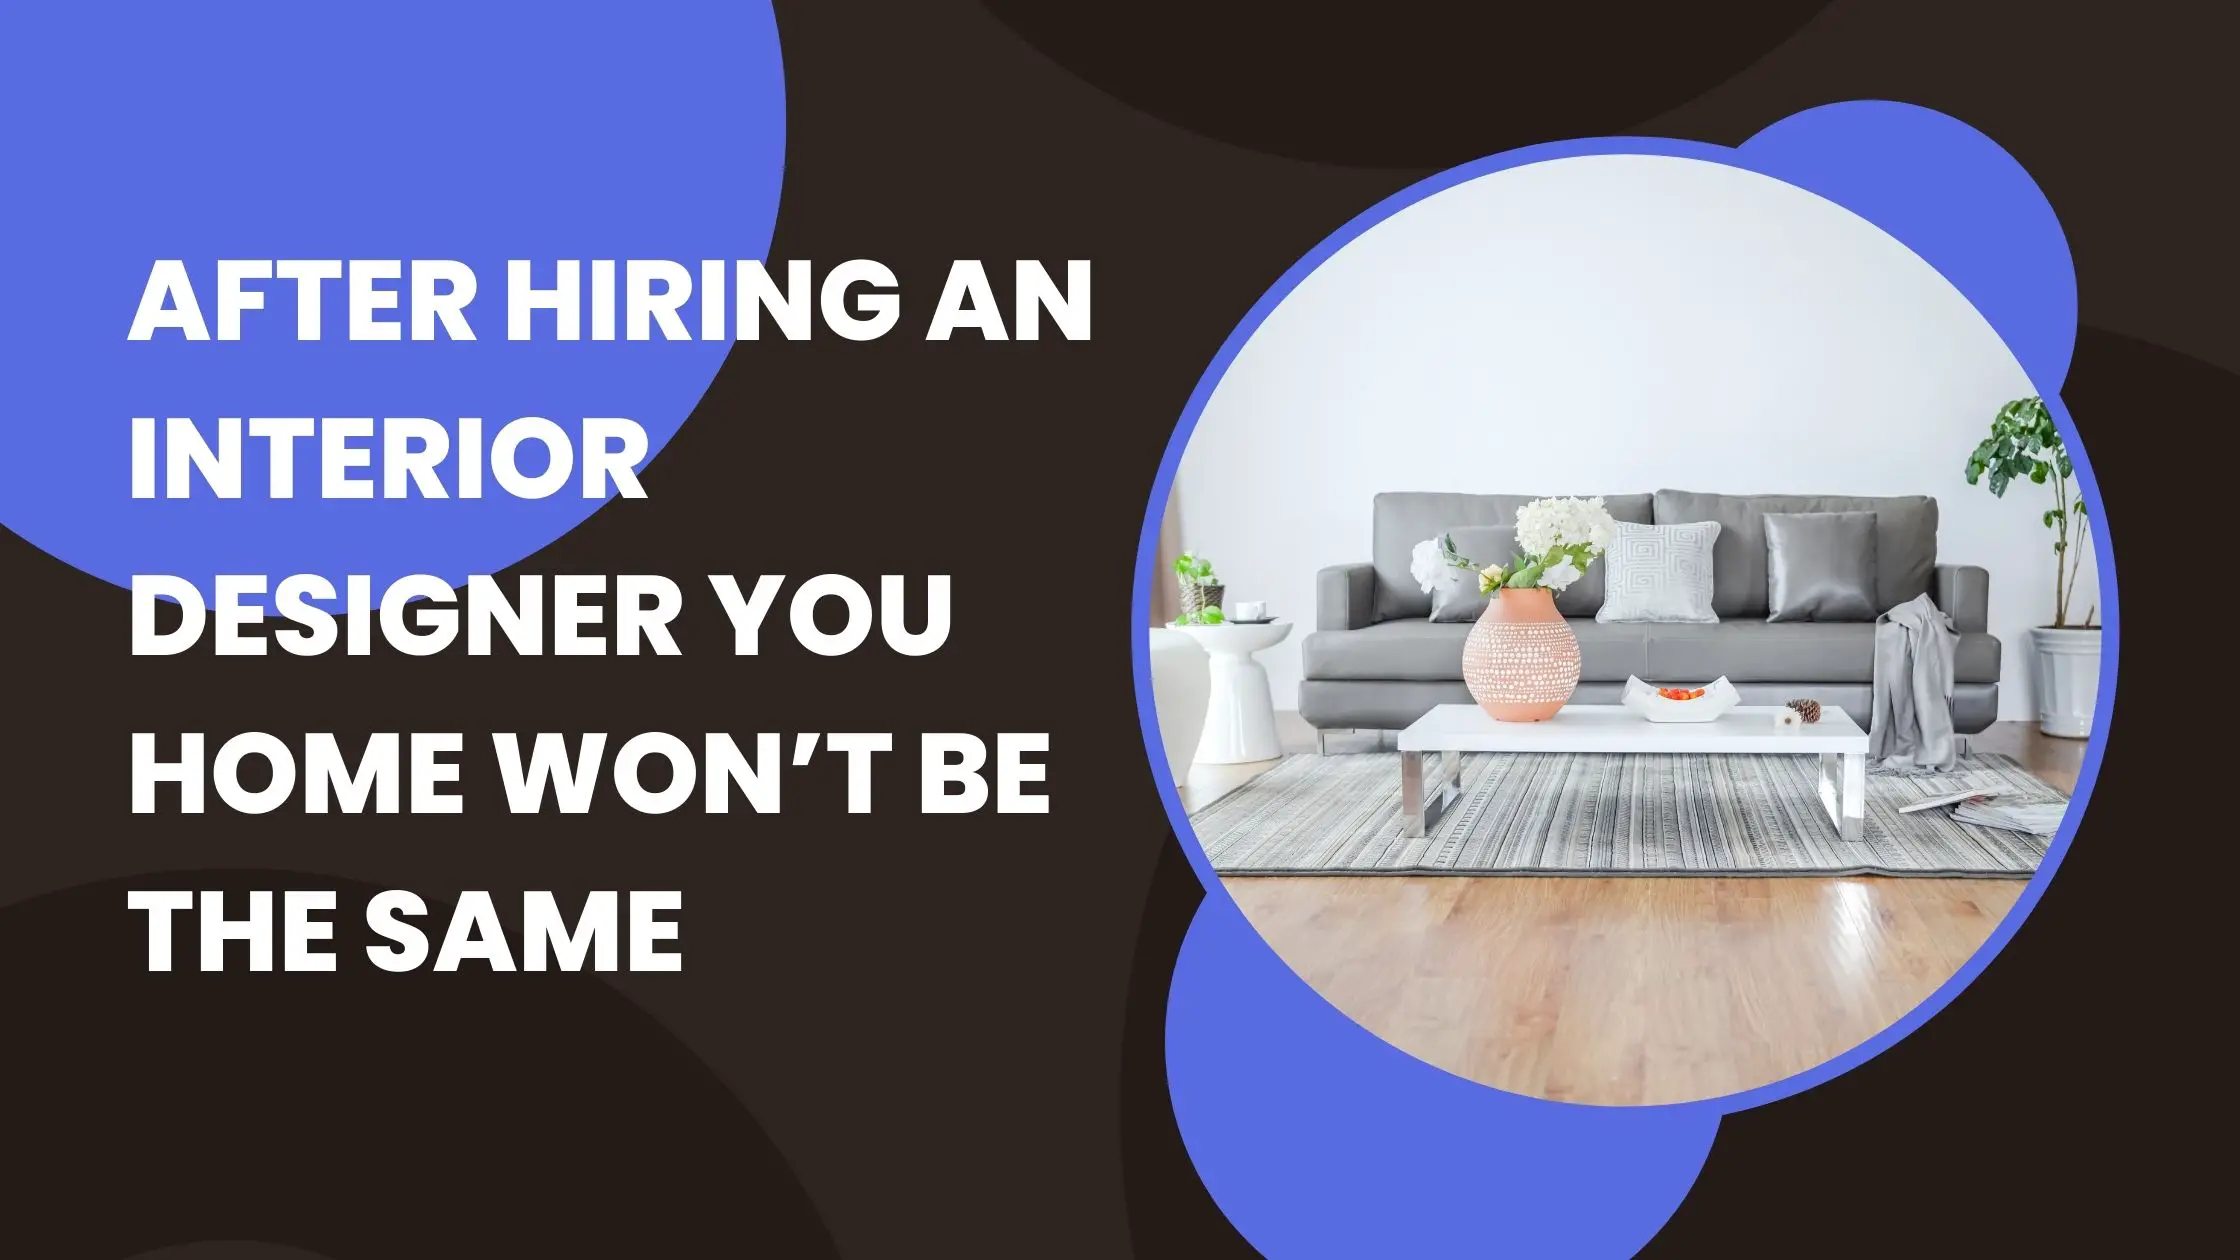 After Hiring an Interior Designer You Home Won’t Be the Same